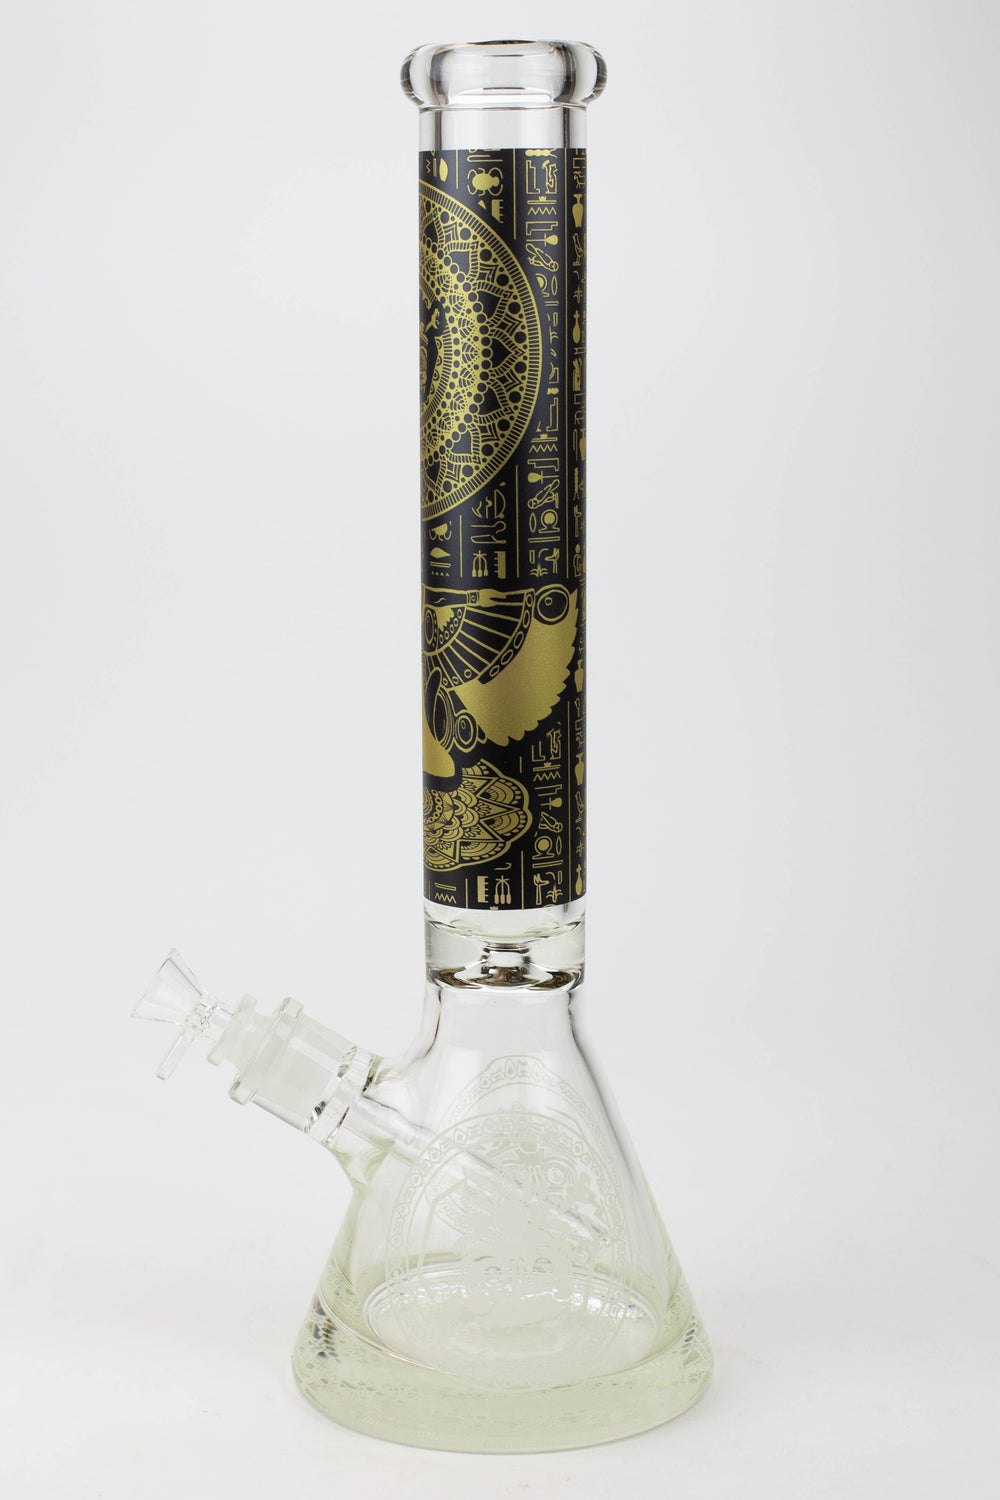 Egyptian hieroglyph 9 mm glow in the dark glass pipes_1